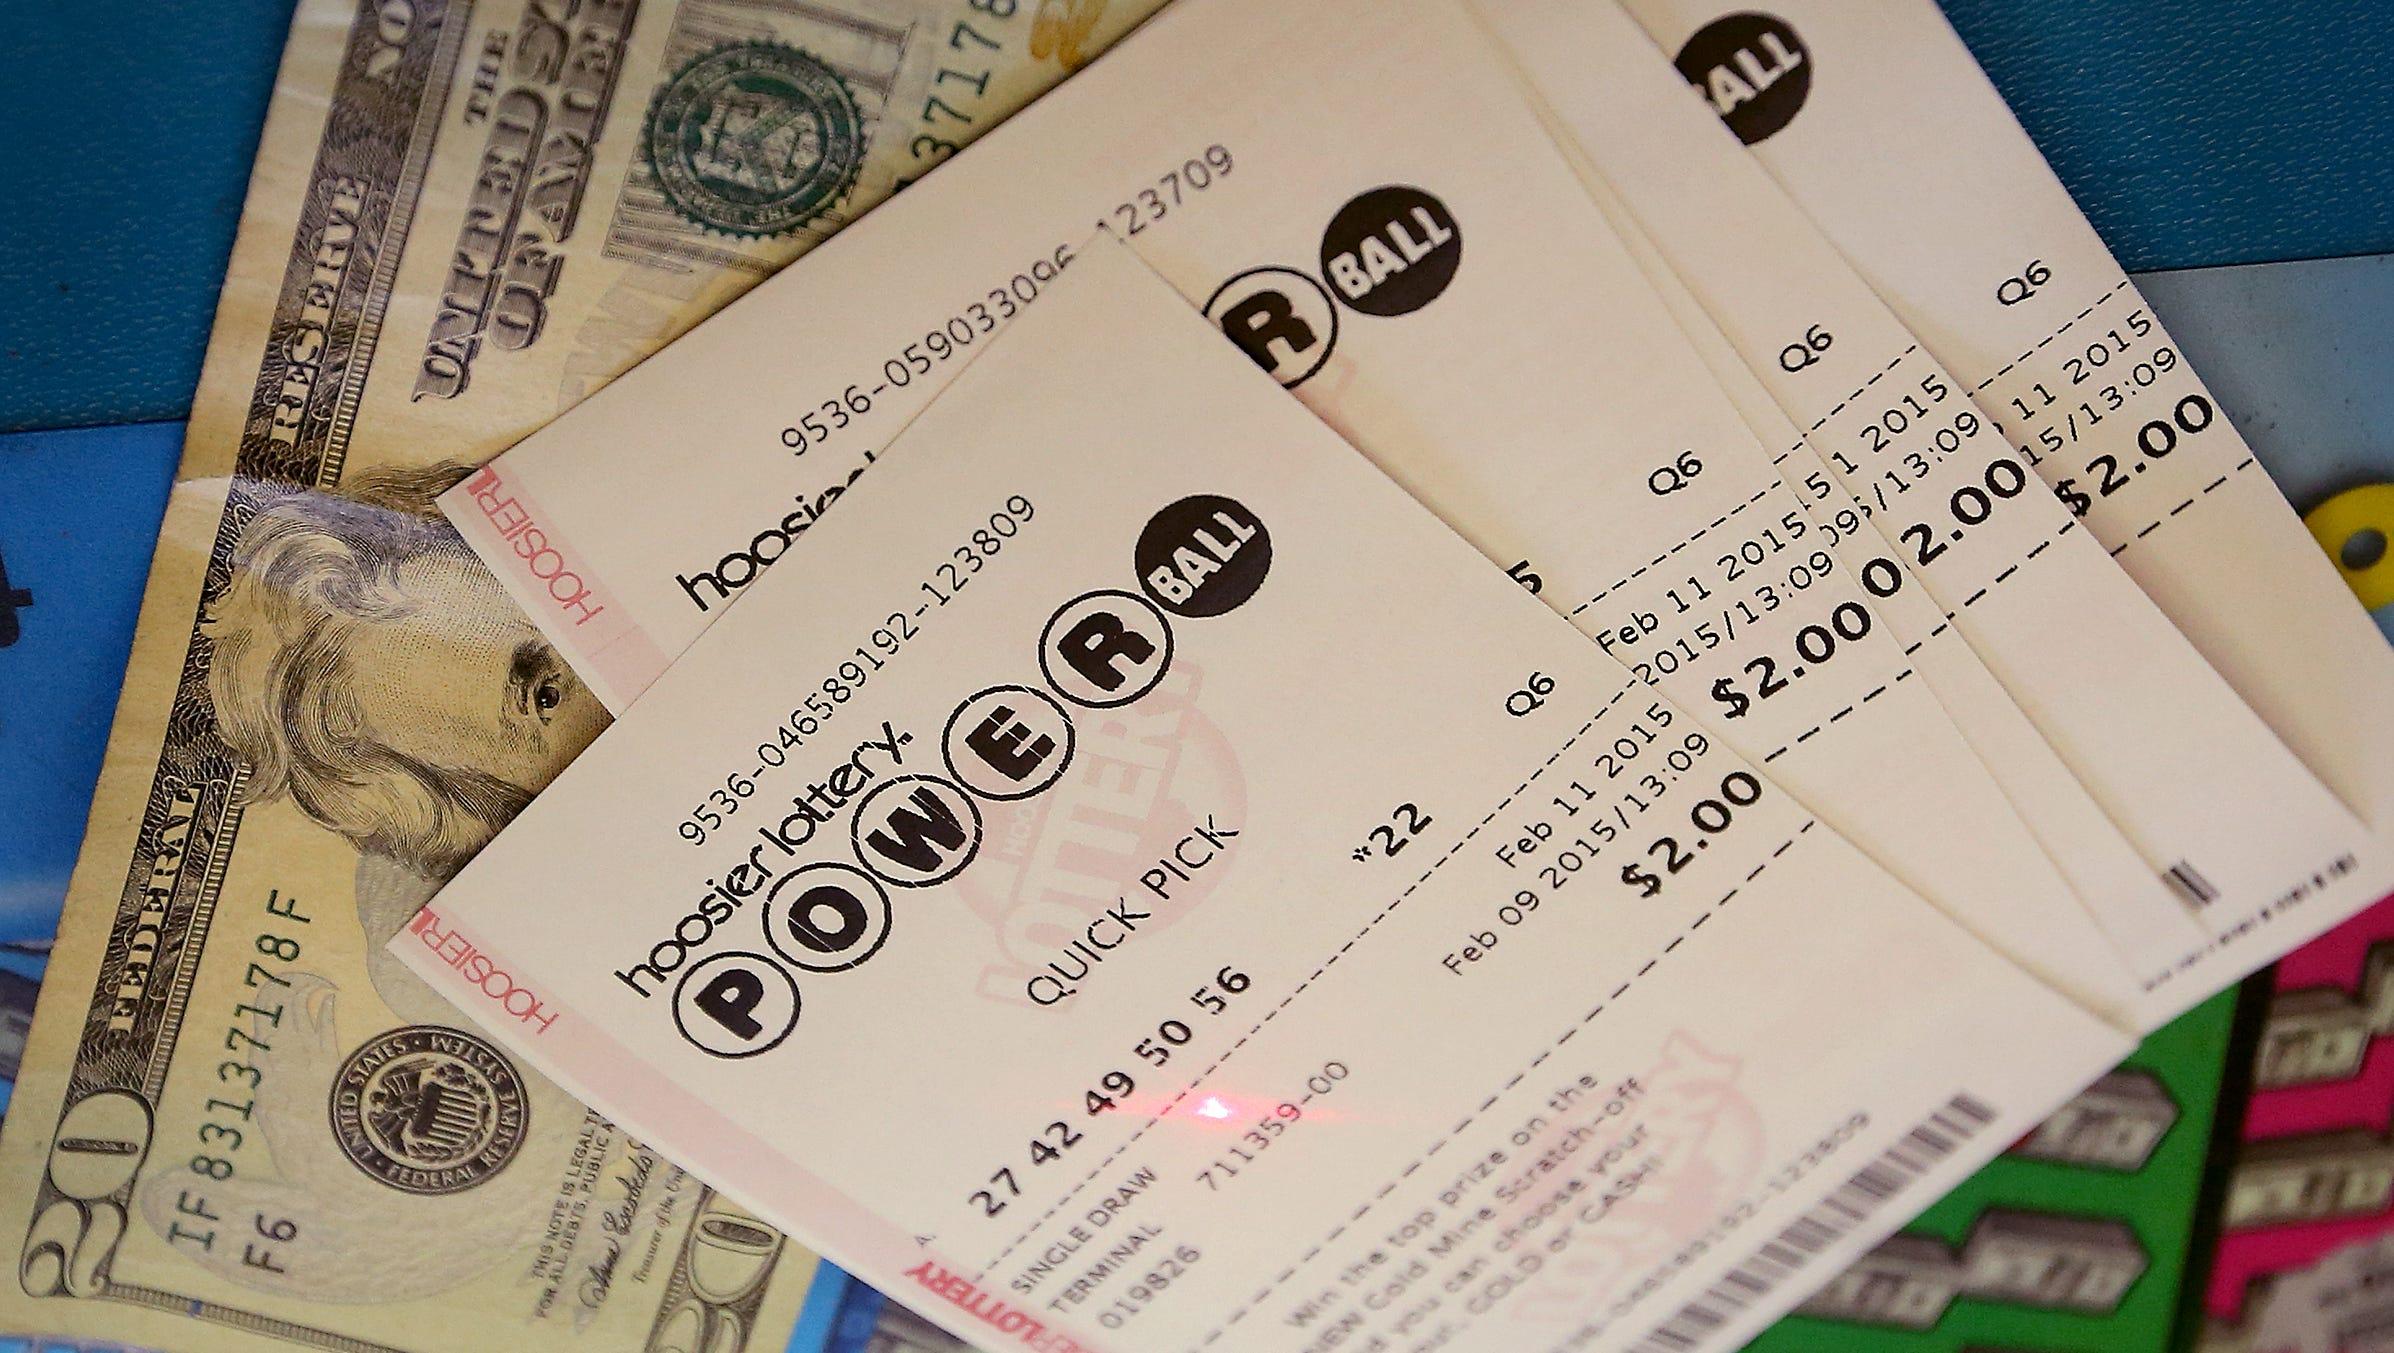 The Powerball jackpot is estimated at $1 million, with a cash value of $483.8 million. Monday night